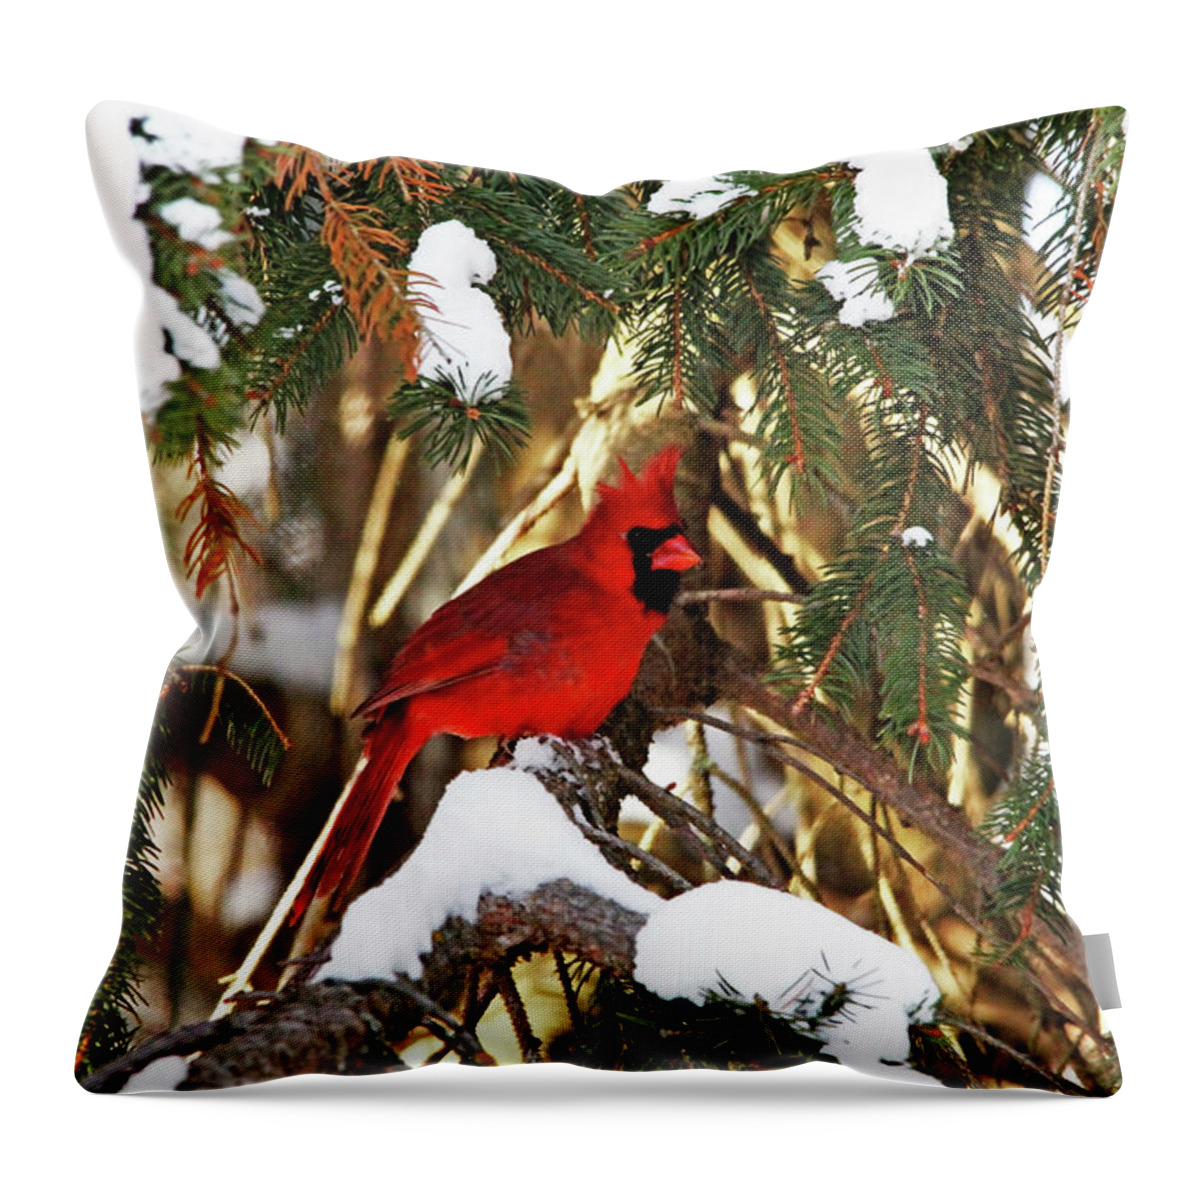 Northern Red Cardinal Throw Pillow featuring the photograph Northern Cardinal In Winter by Debbie Oppermann